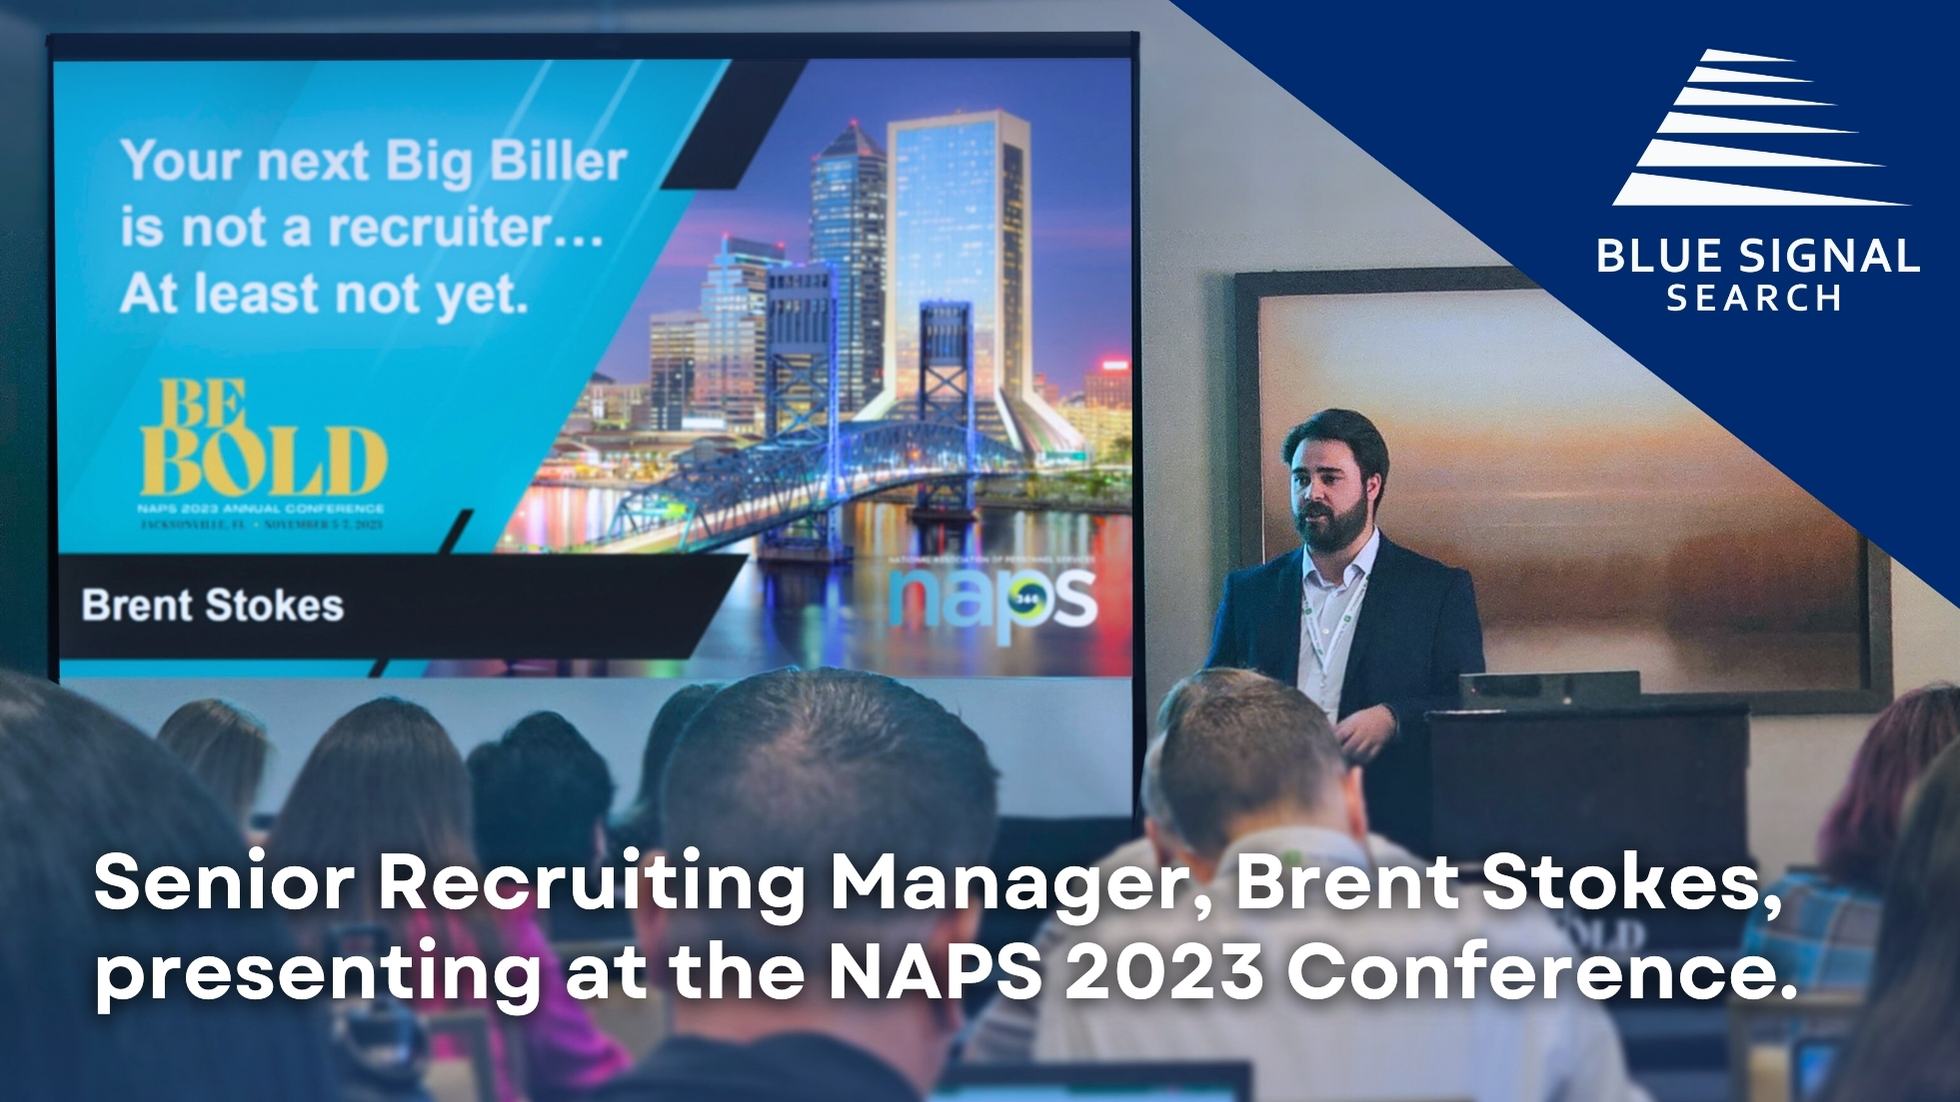 Blue Signal recruiter Brent Stokes giving a presentation at the NAPS 2023 Conference, with a screen behind him displaying the message 'Your next Big Biller is not a recruiter... At least not yet. BE BOLD' and the Jacksonville, FL skyline.